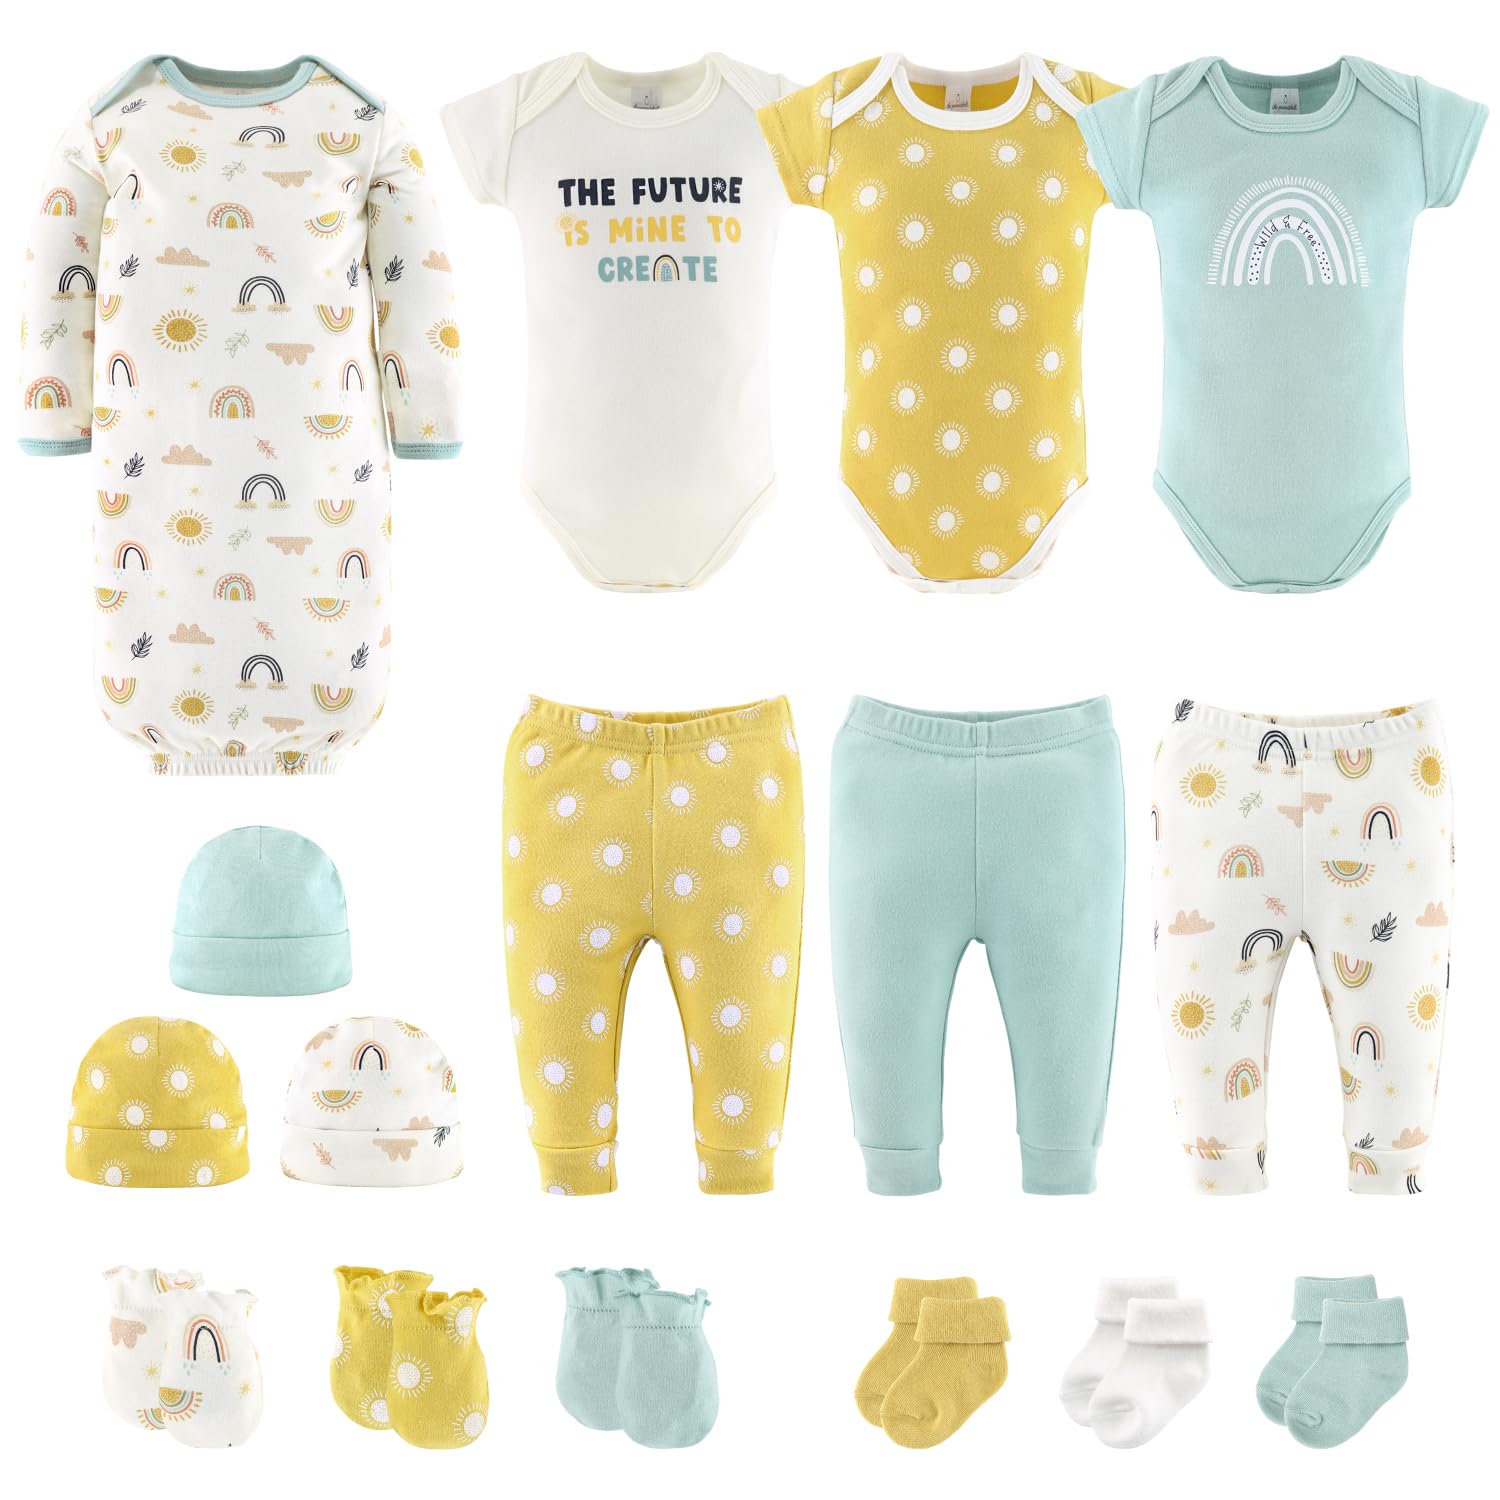 The Peanutshell Newborn Clothes & EssentIals, 16 Piece Unisex Baby Layette Gift Set, 0-3 Month Outfits